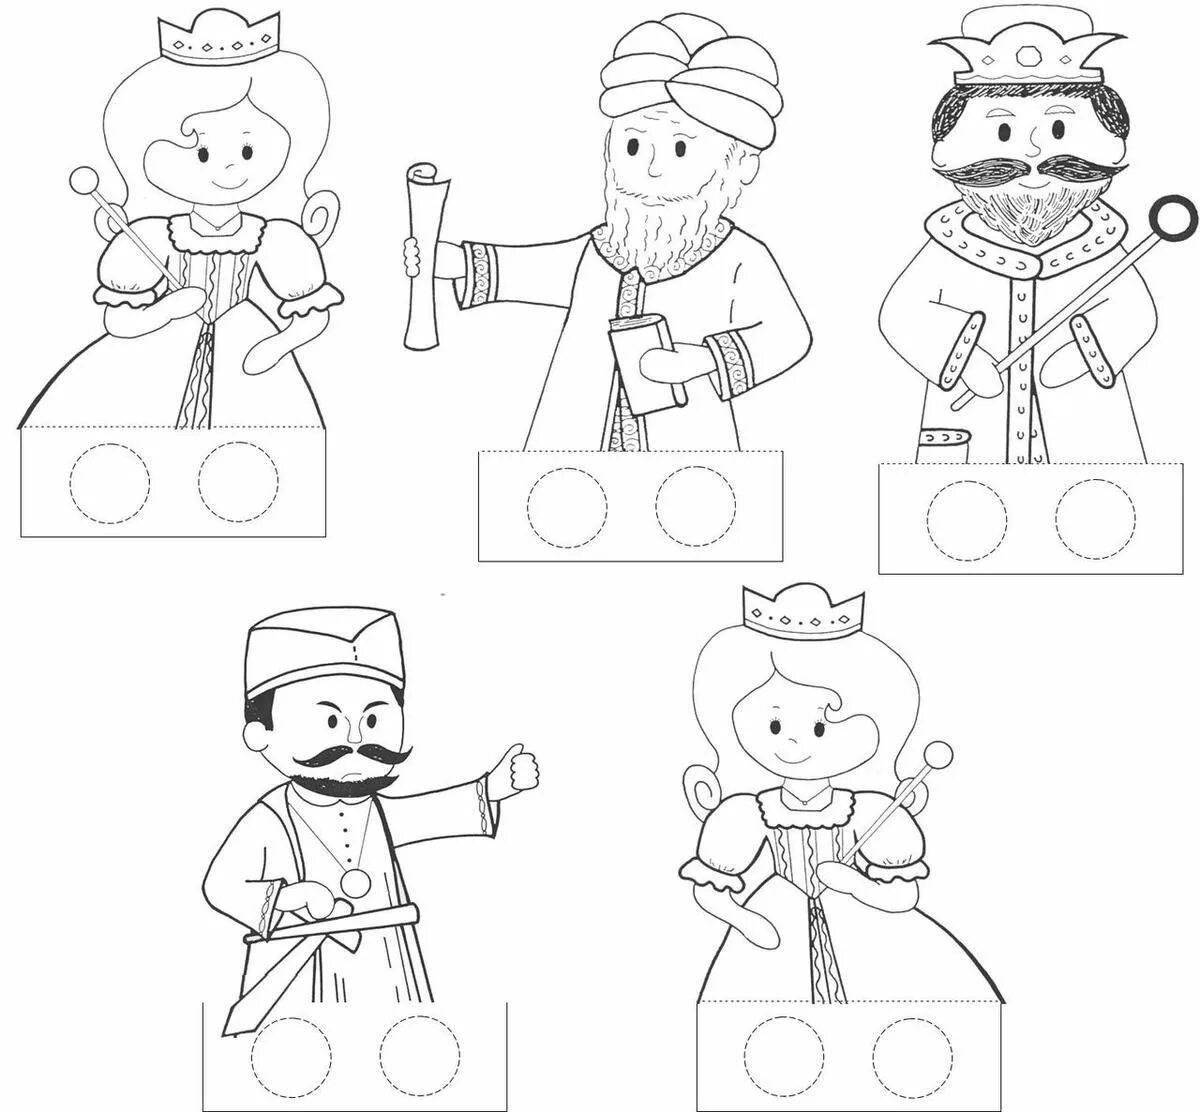 Charming finger theater coloring page